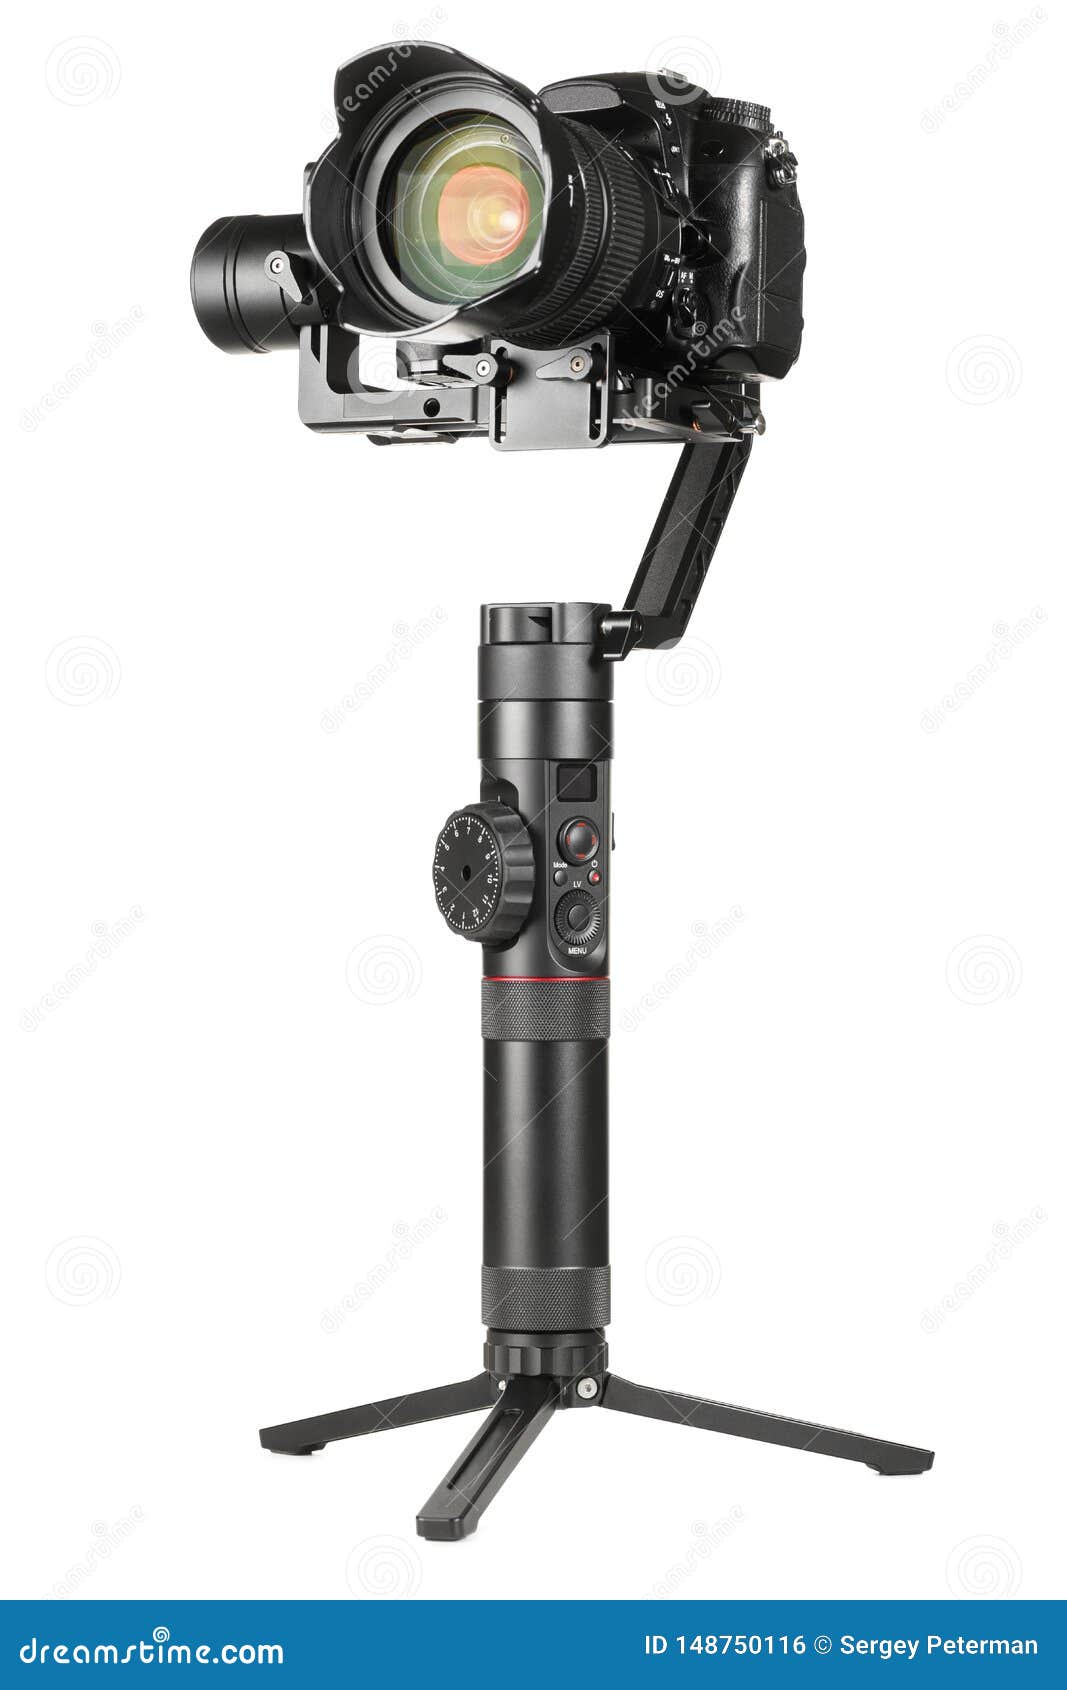 gimbal stabilizer with camera